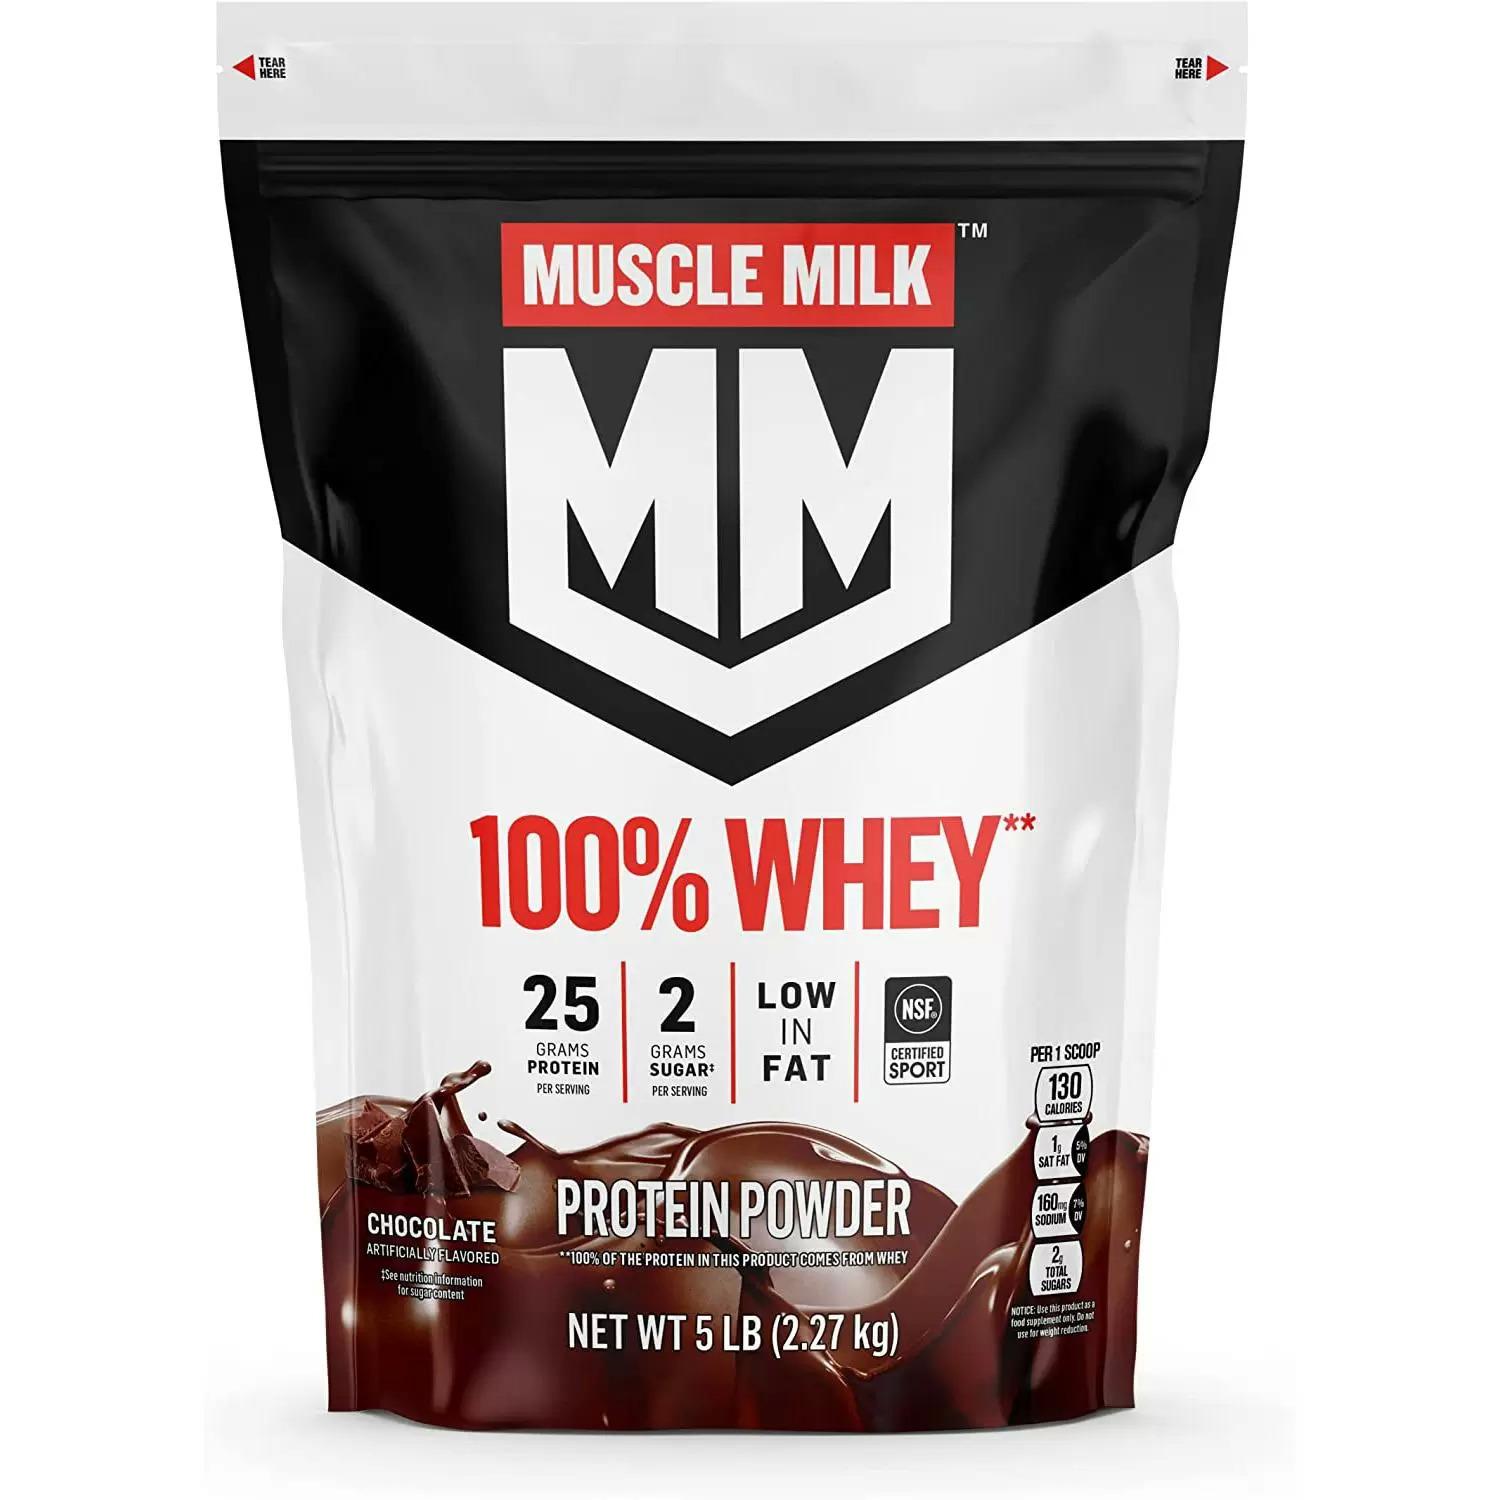 Muscle Milk 5Lbs Chocolate Whey Protein Powder for $39.99 Shipped